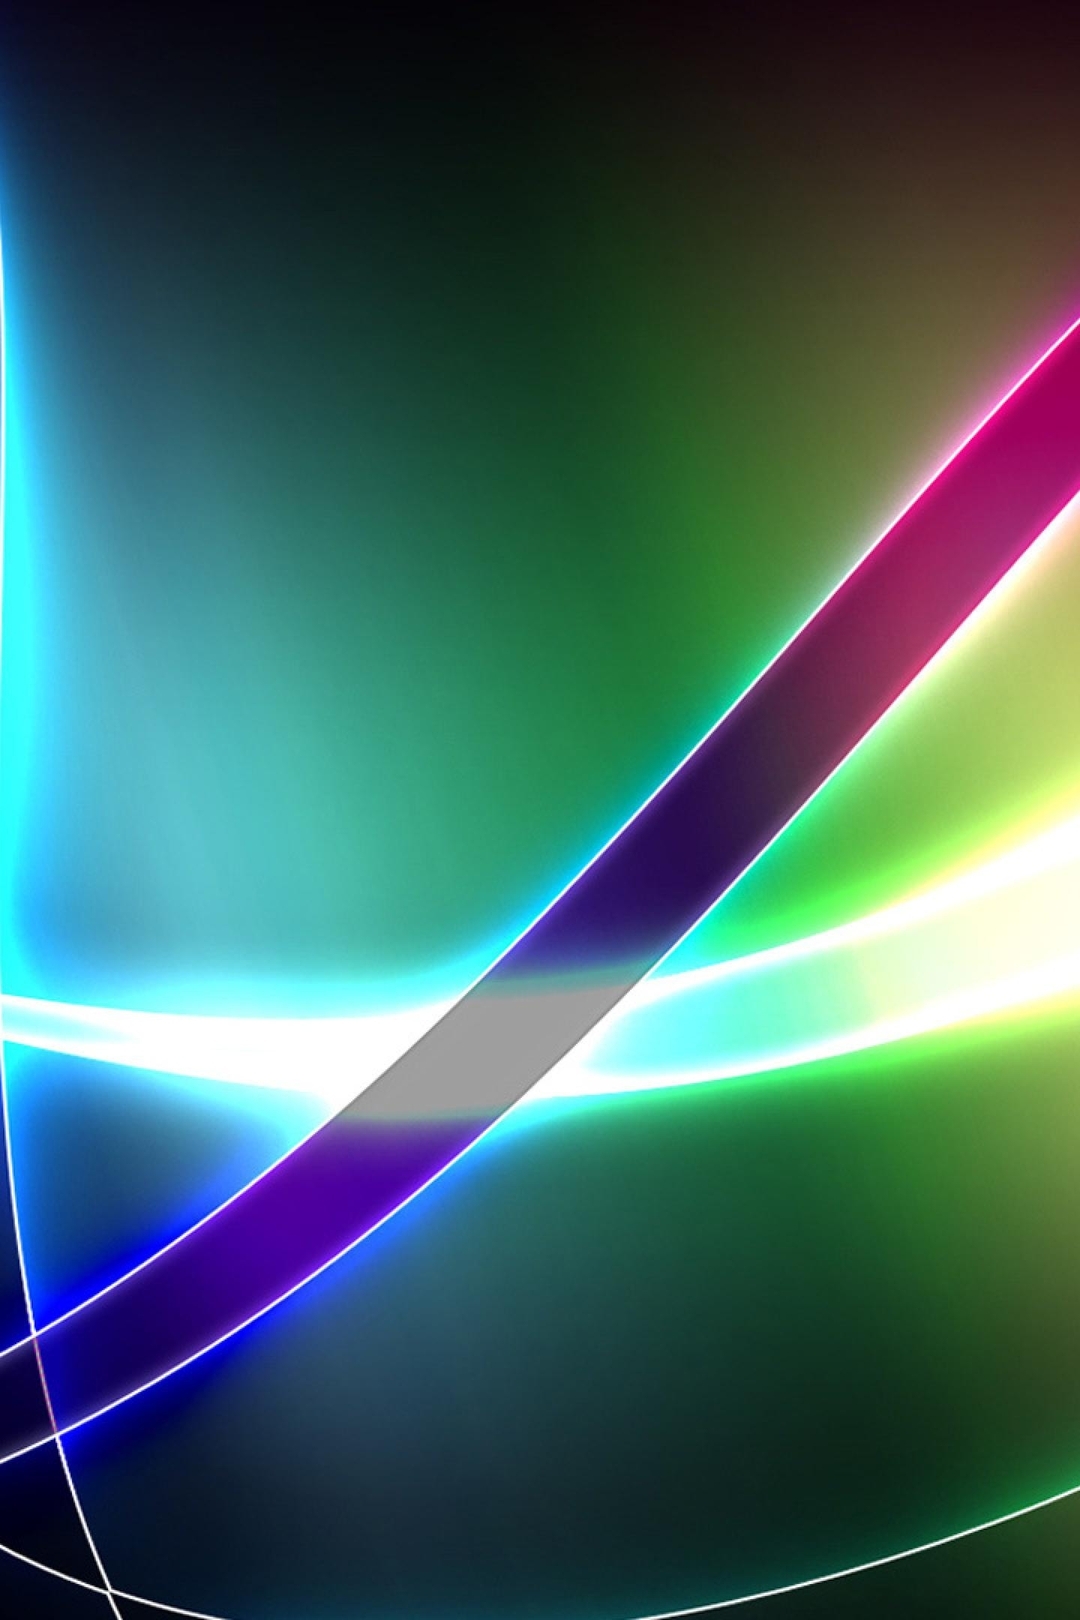 Image: Color, rainbow, lines, stripes, glow, transparency